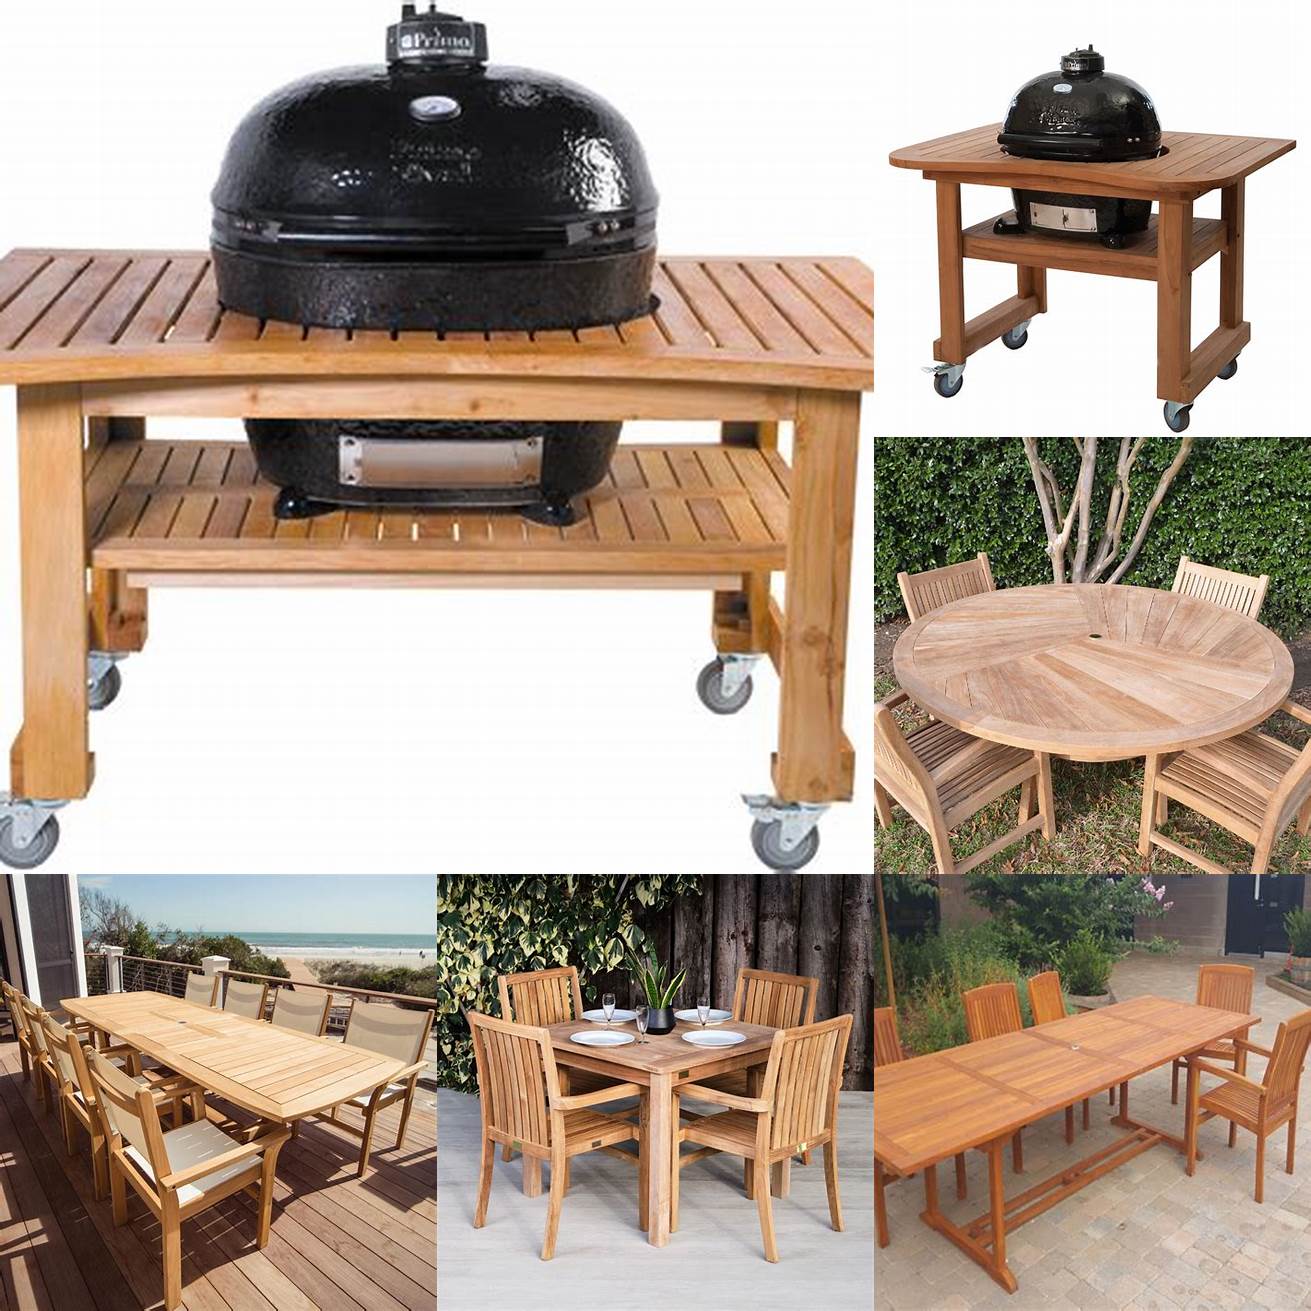 Teak Table With a Grill